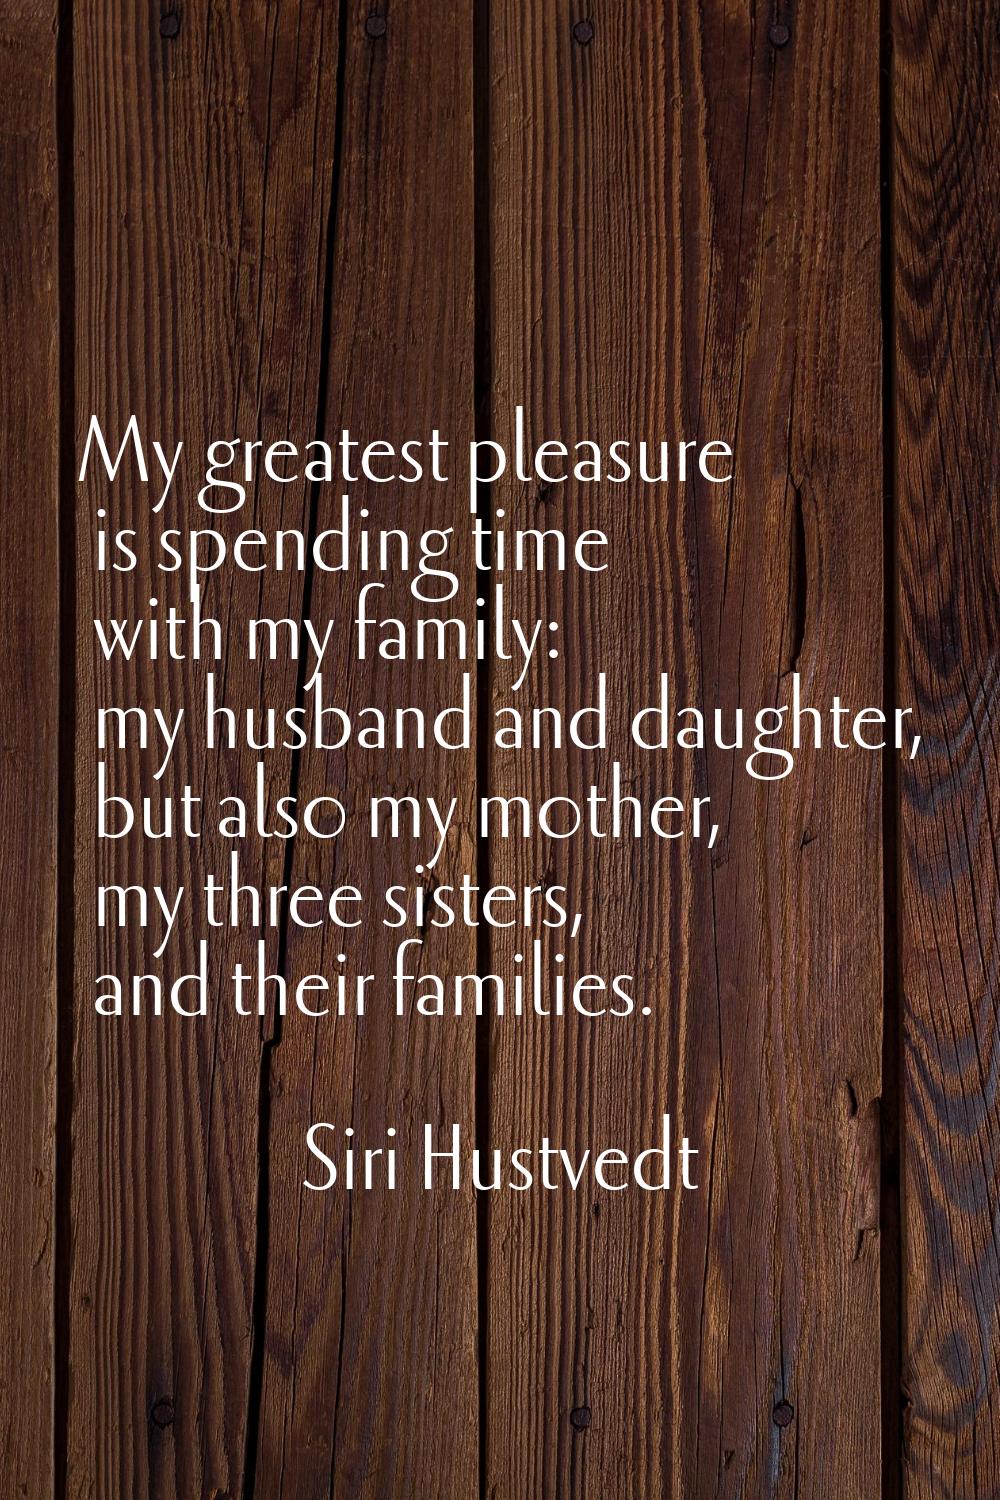 My greatest pleasure is spending time with my family: my husband and daughter, but also my mother, 